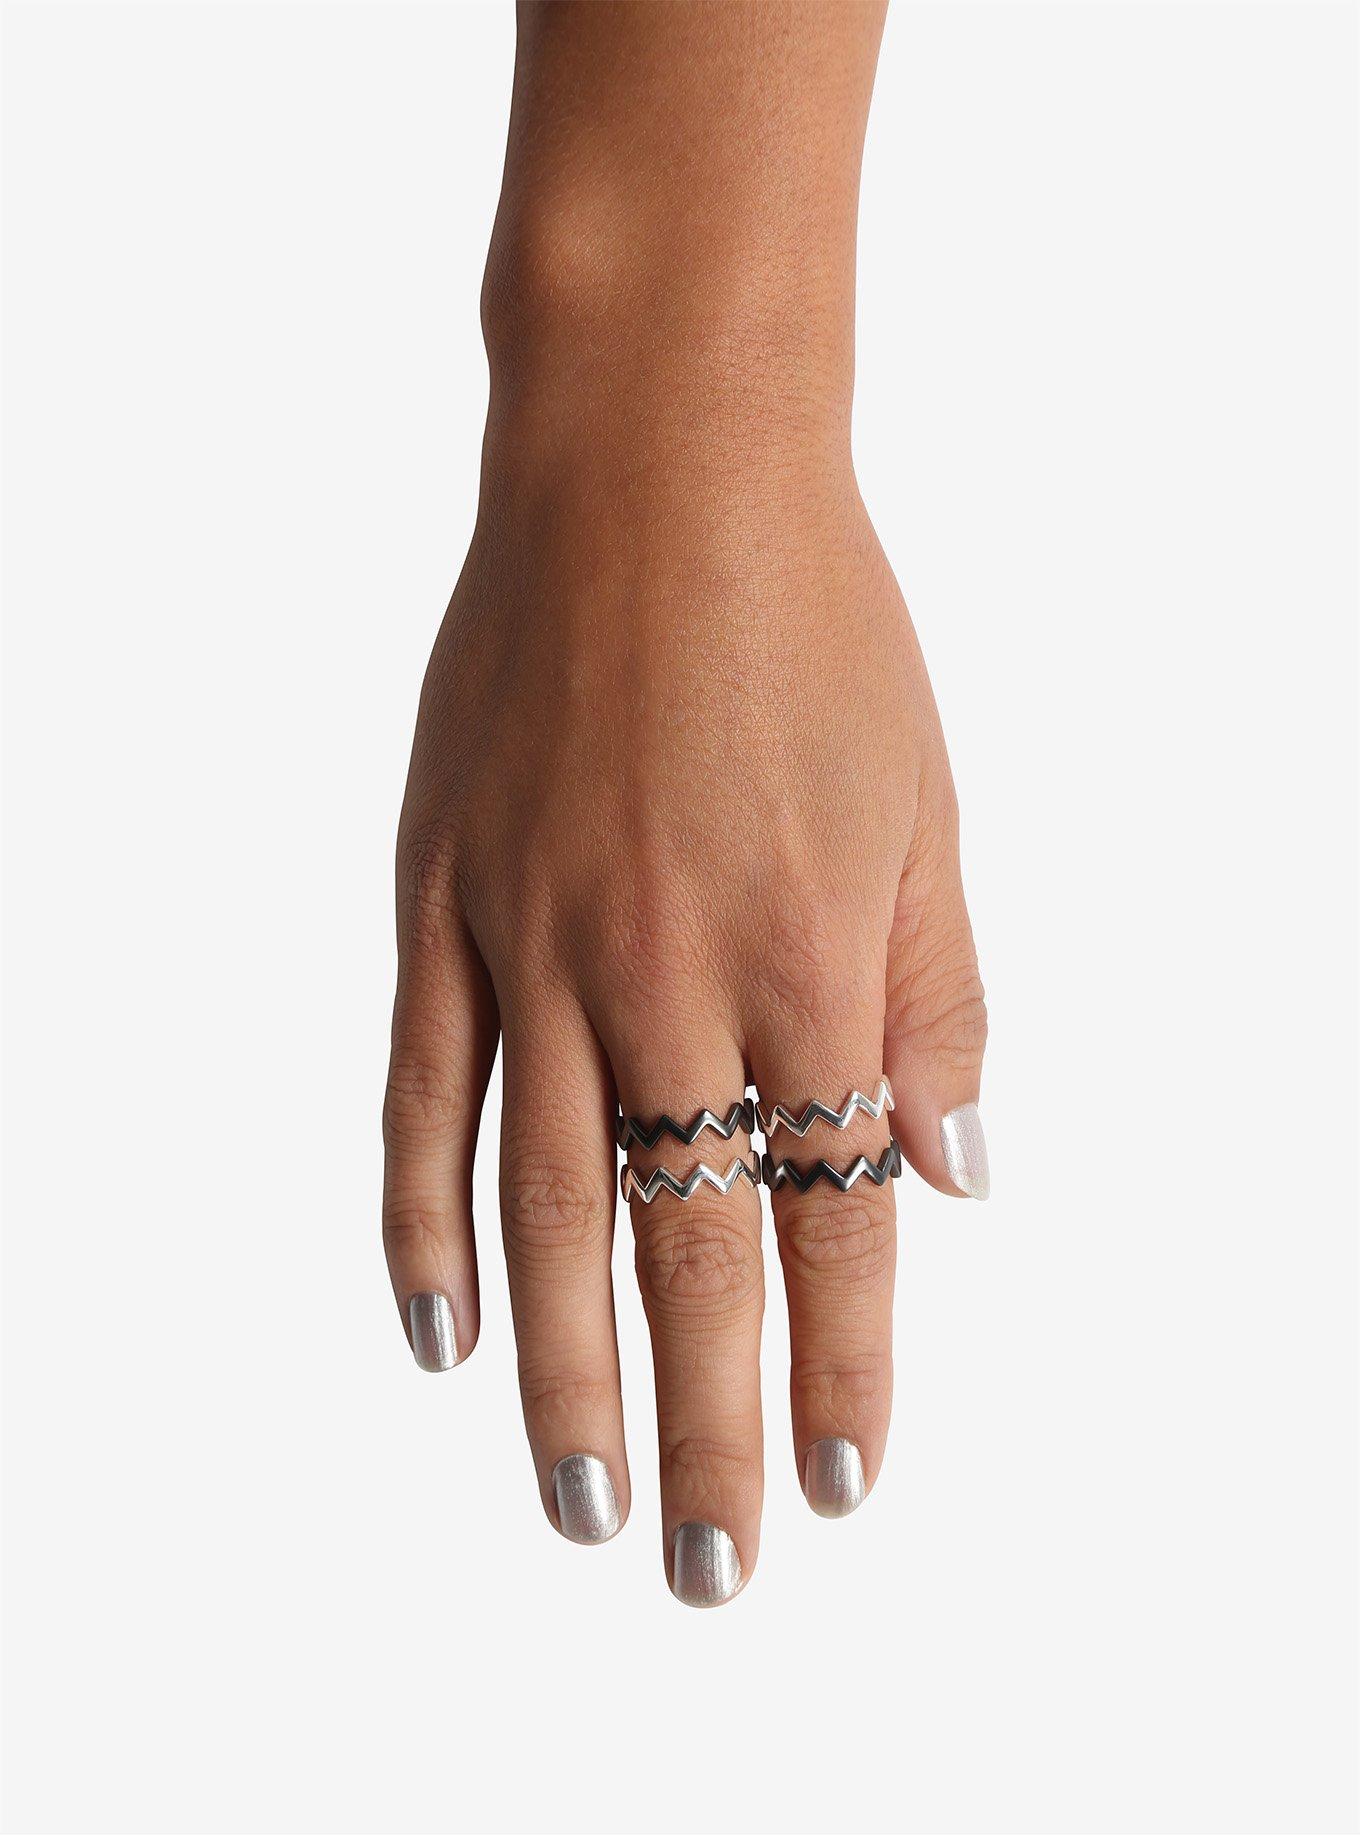 Twin Peaks ZigZag Stacking Silver Ring Set - BoxLunch Exclusive, SILVER, hi-res